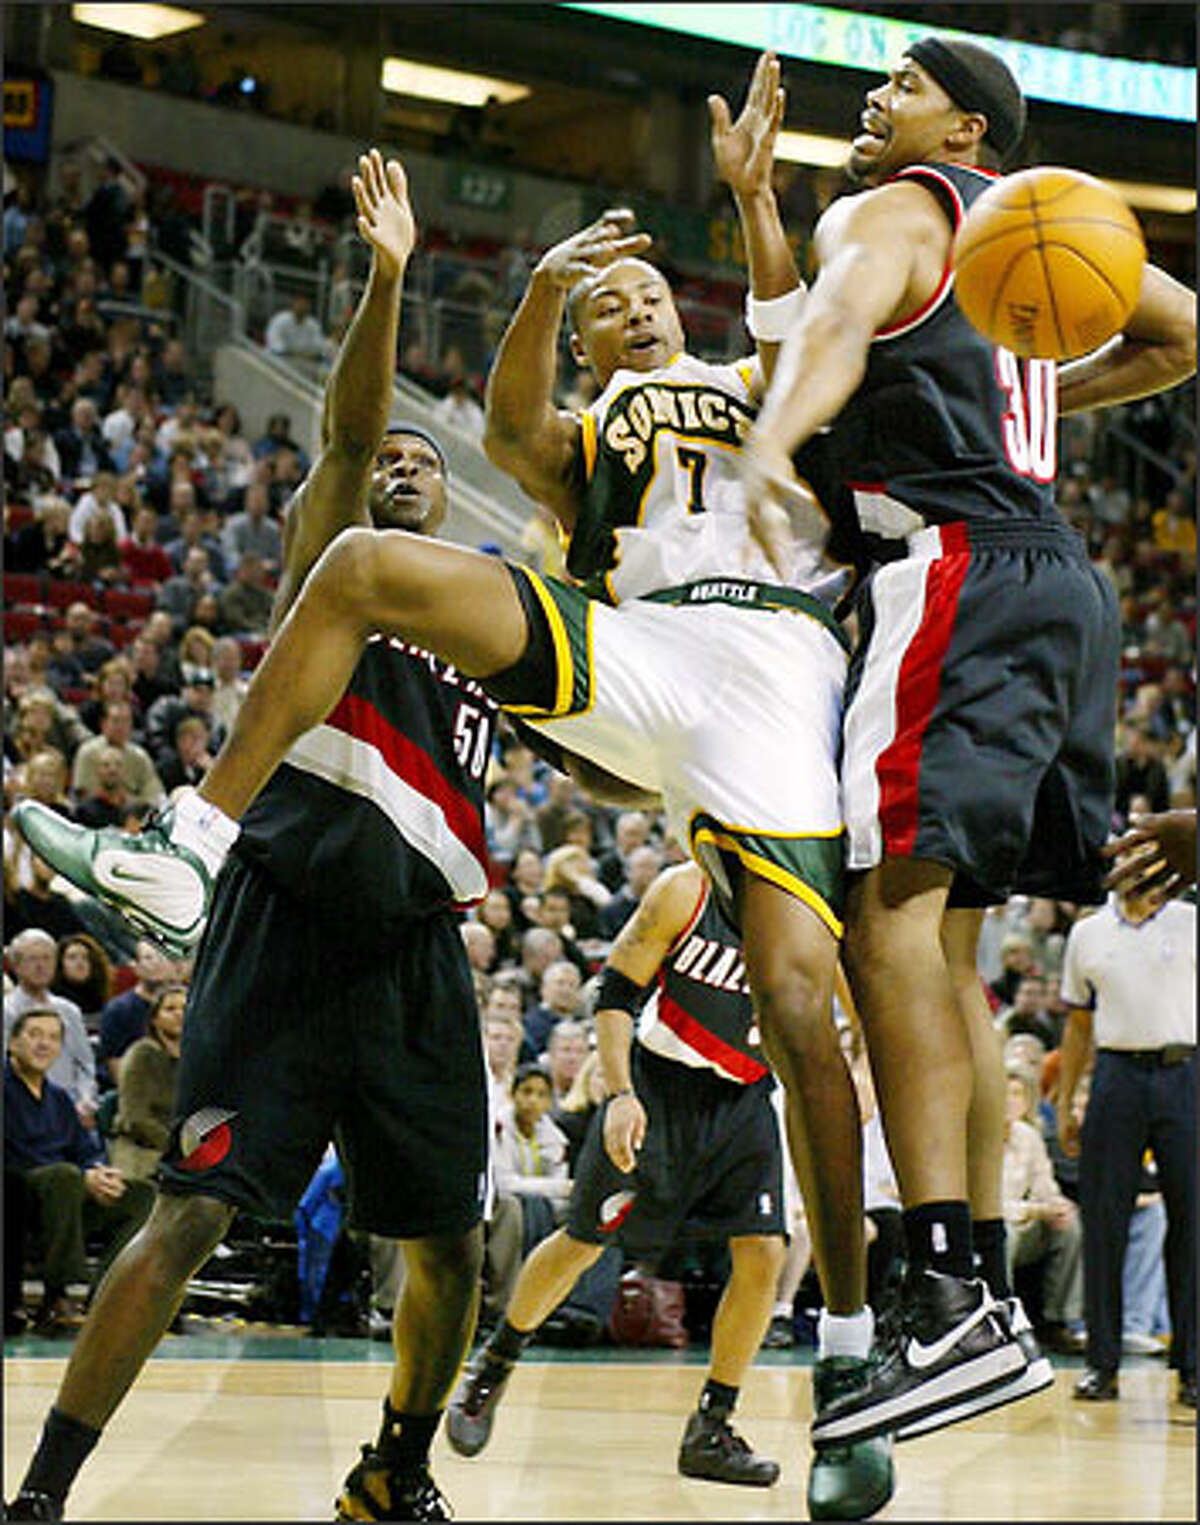 Rashard Lewis battles for an offensive rebound with the Blazers Bonzie Wells and Rasheed Wallace.